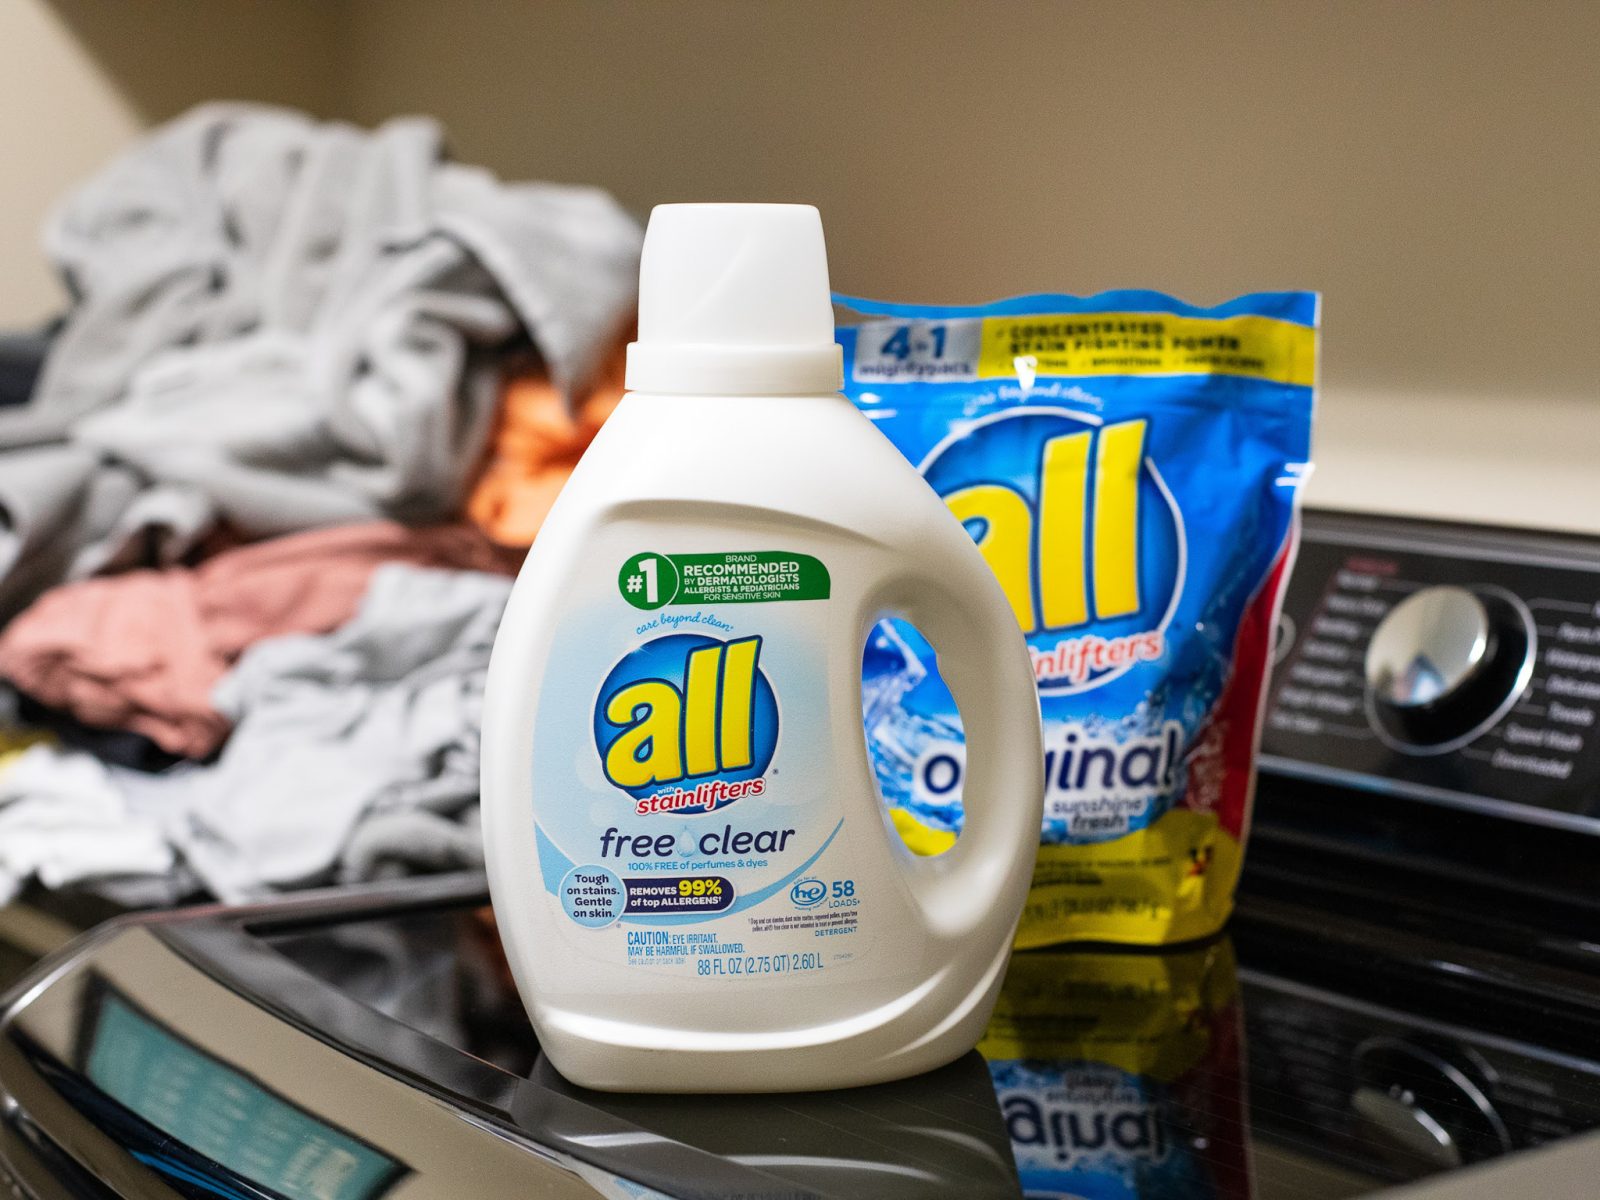 All Laundry Detergent As Low As $3.99 At Kroger